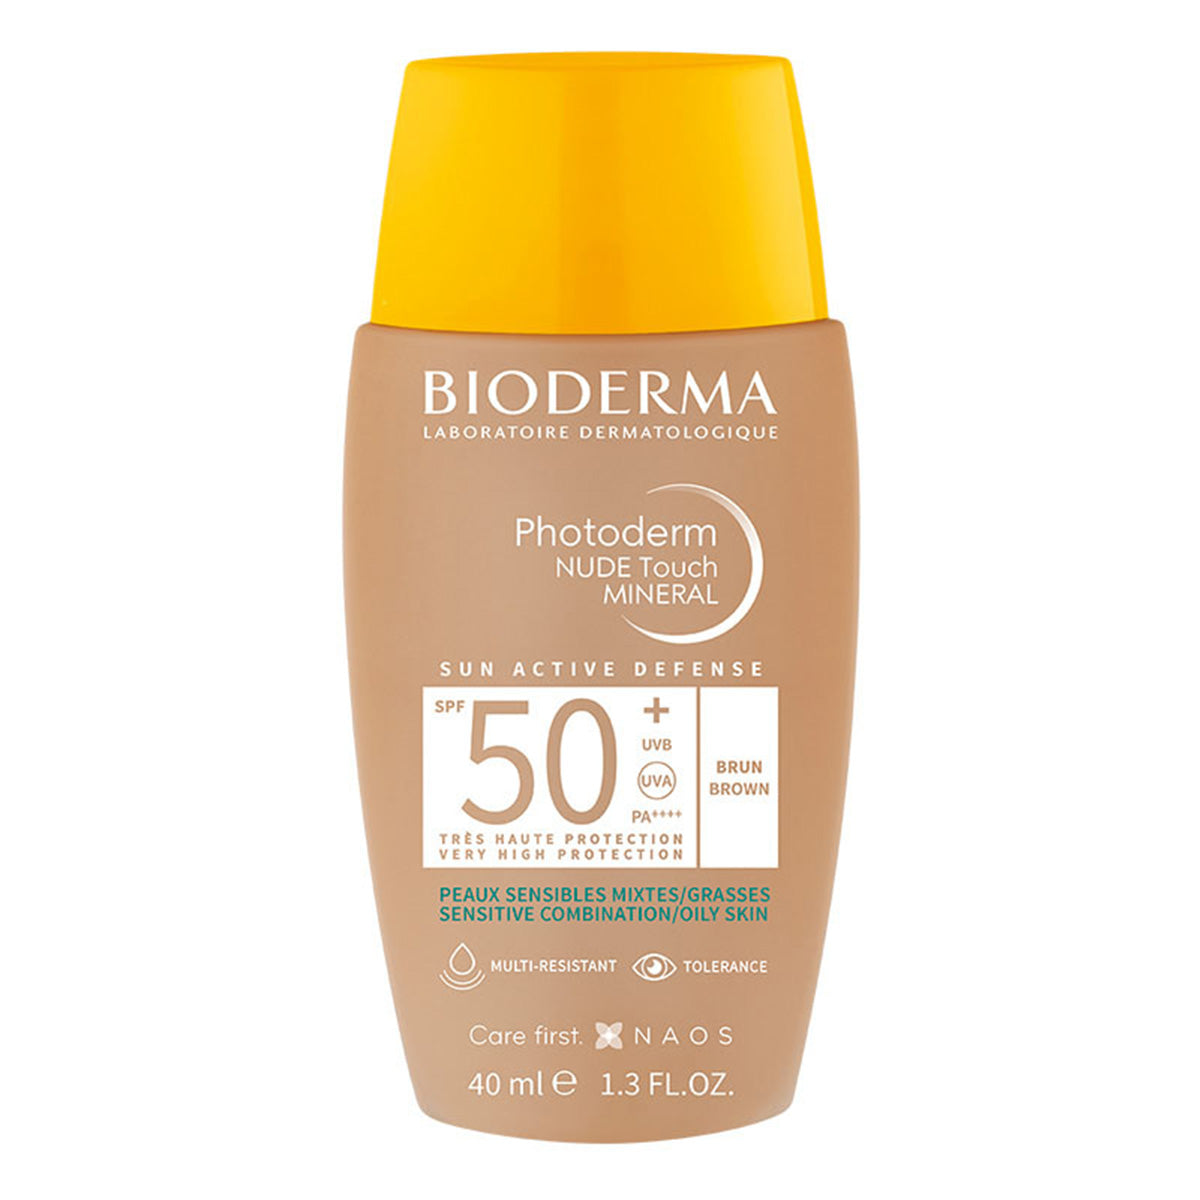 Photoderm nude touch mineral fps 50+ bronce 40 ml.